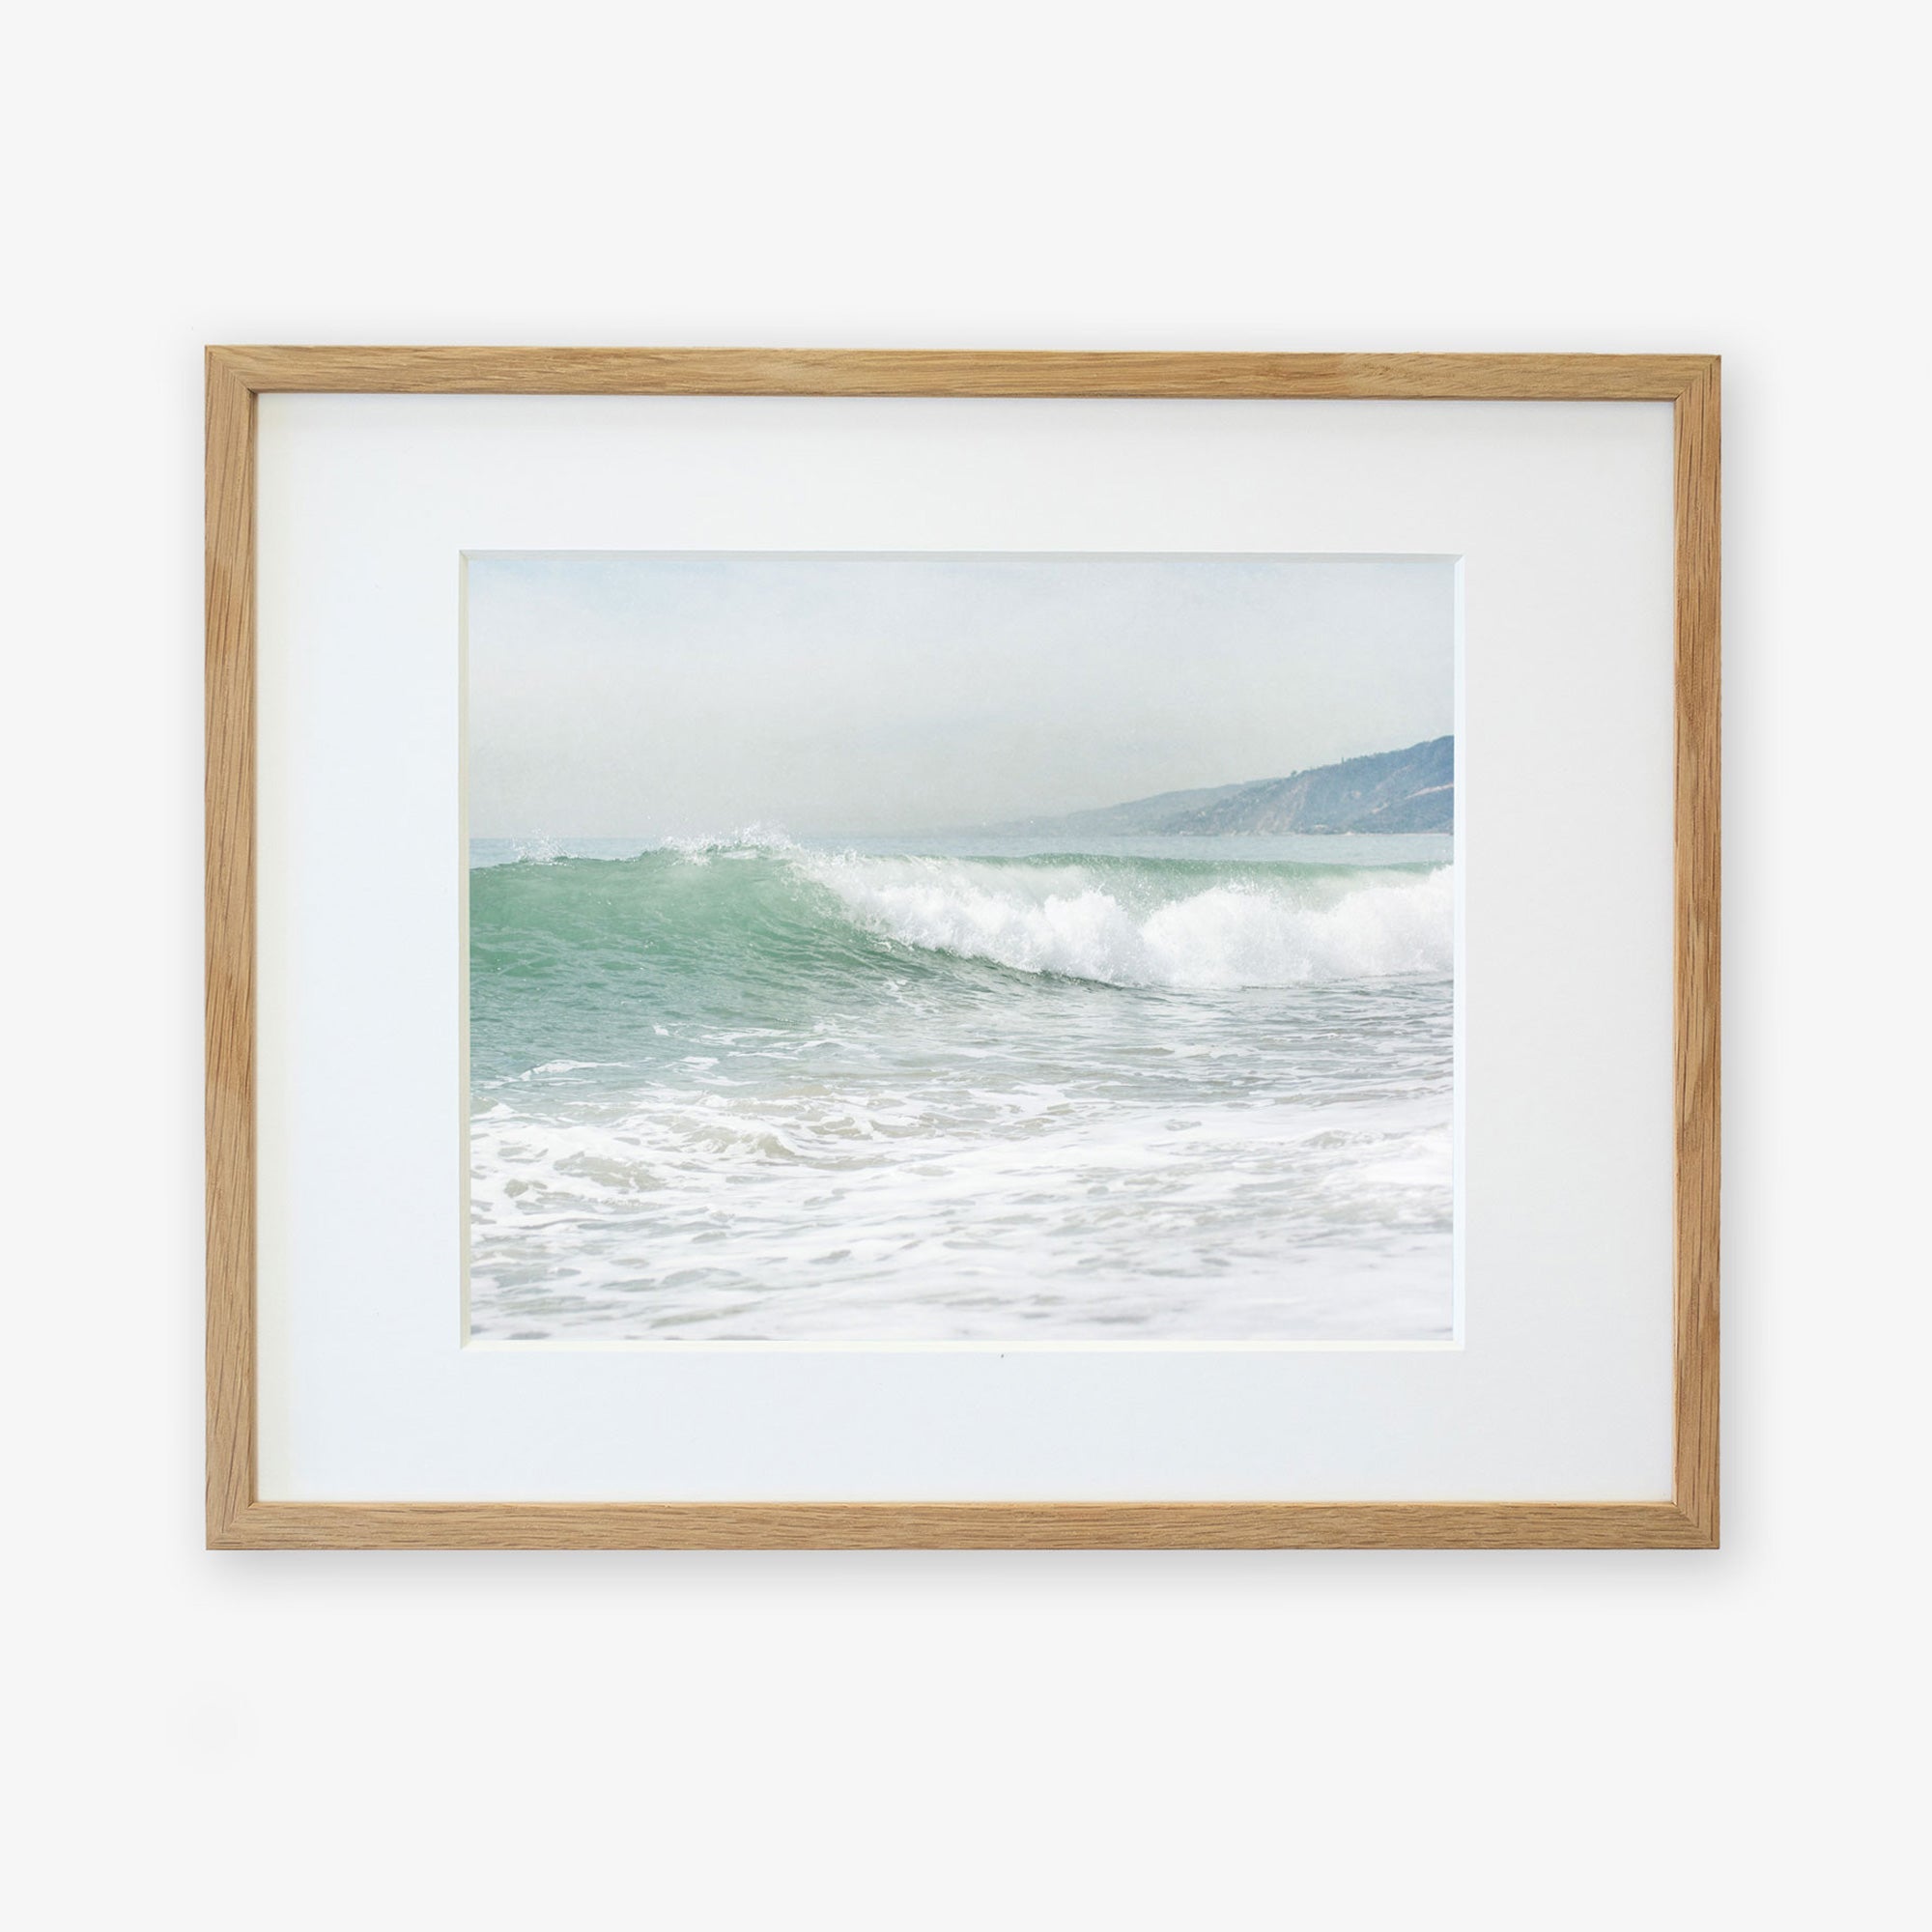 A framed photograph of a wave captured at the moment it breaks on a Southern California beach, with a foamy crest and misty backdrop, hung on a plain white wall. Offley Green's Coastal Print of a Breaking Wave 'Breaking Surf'